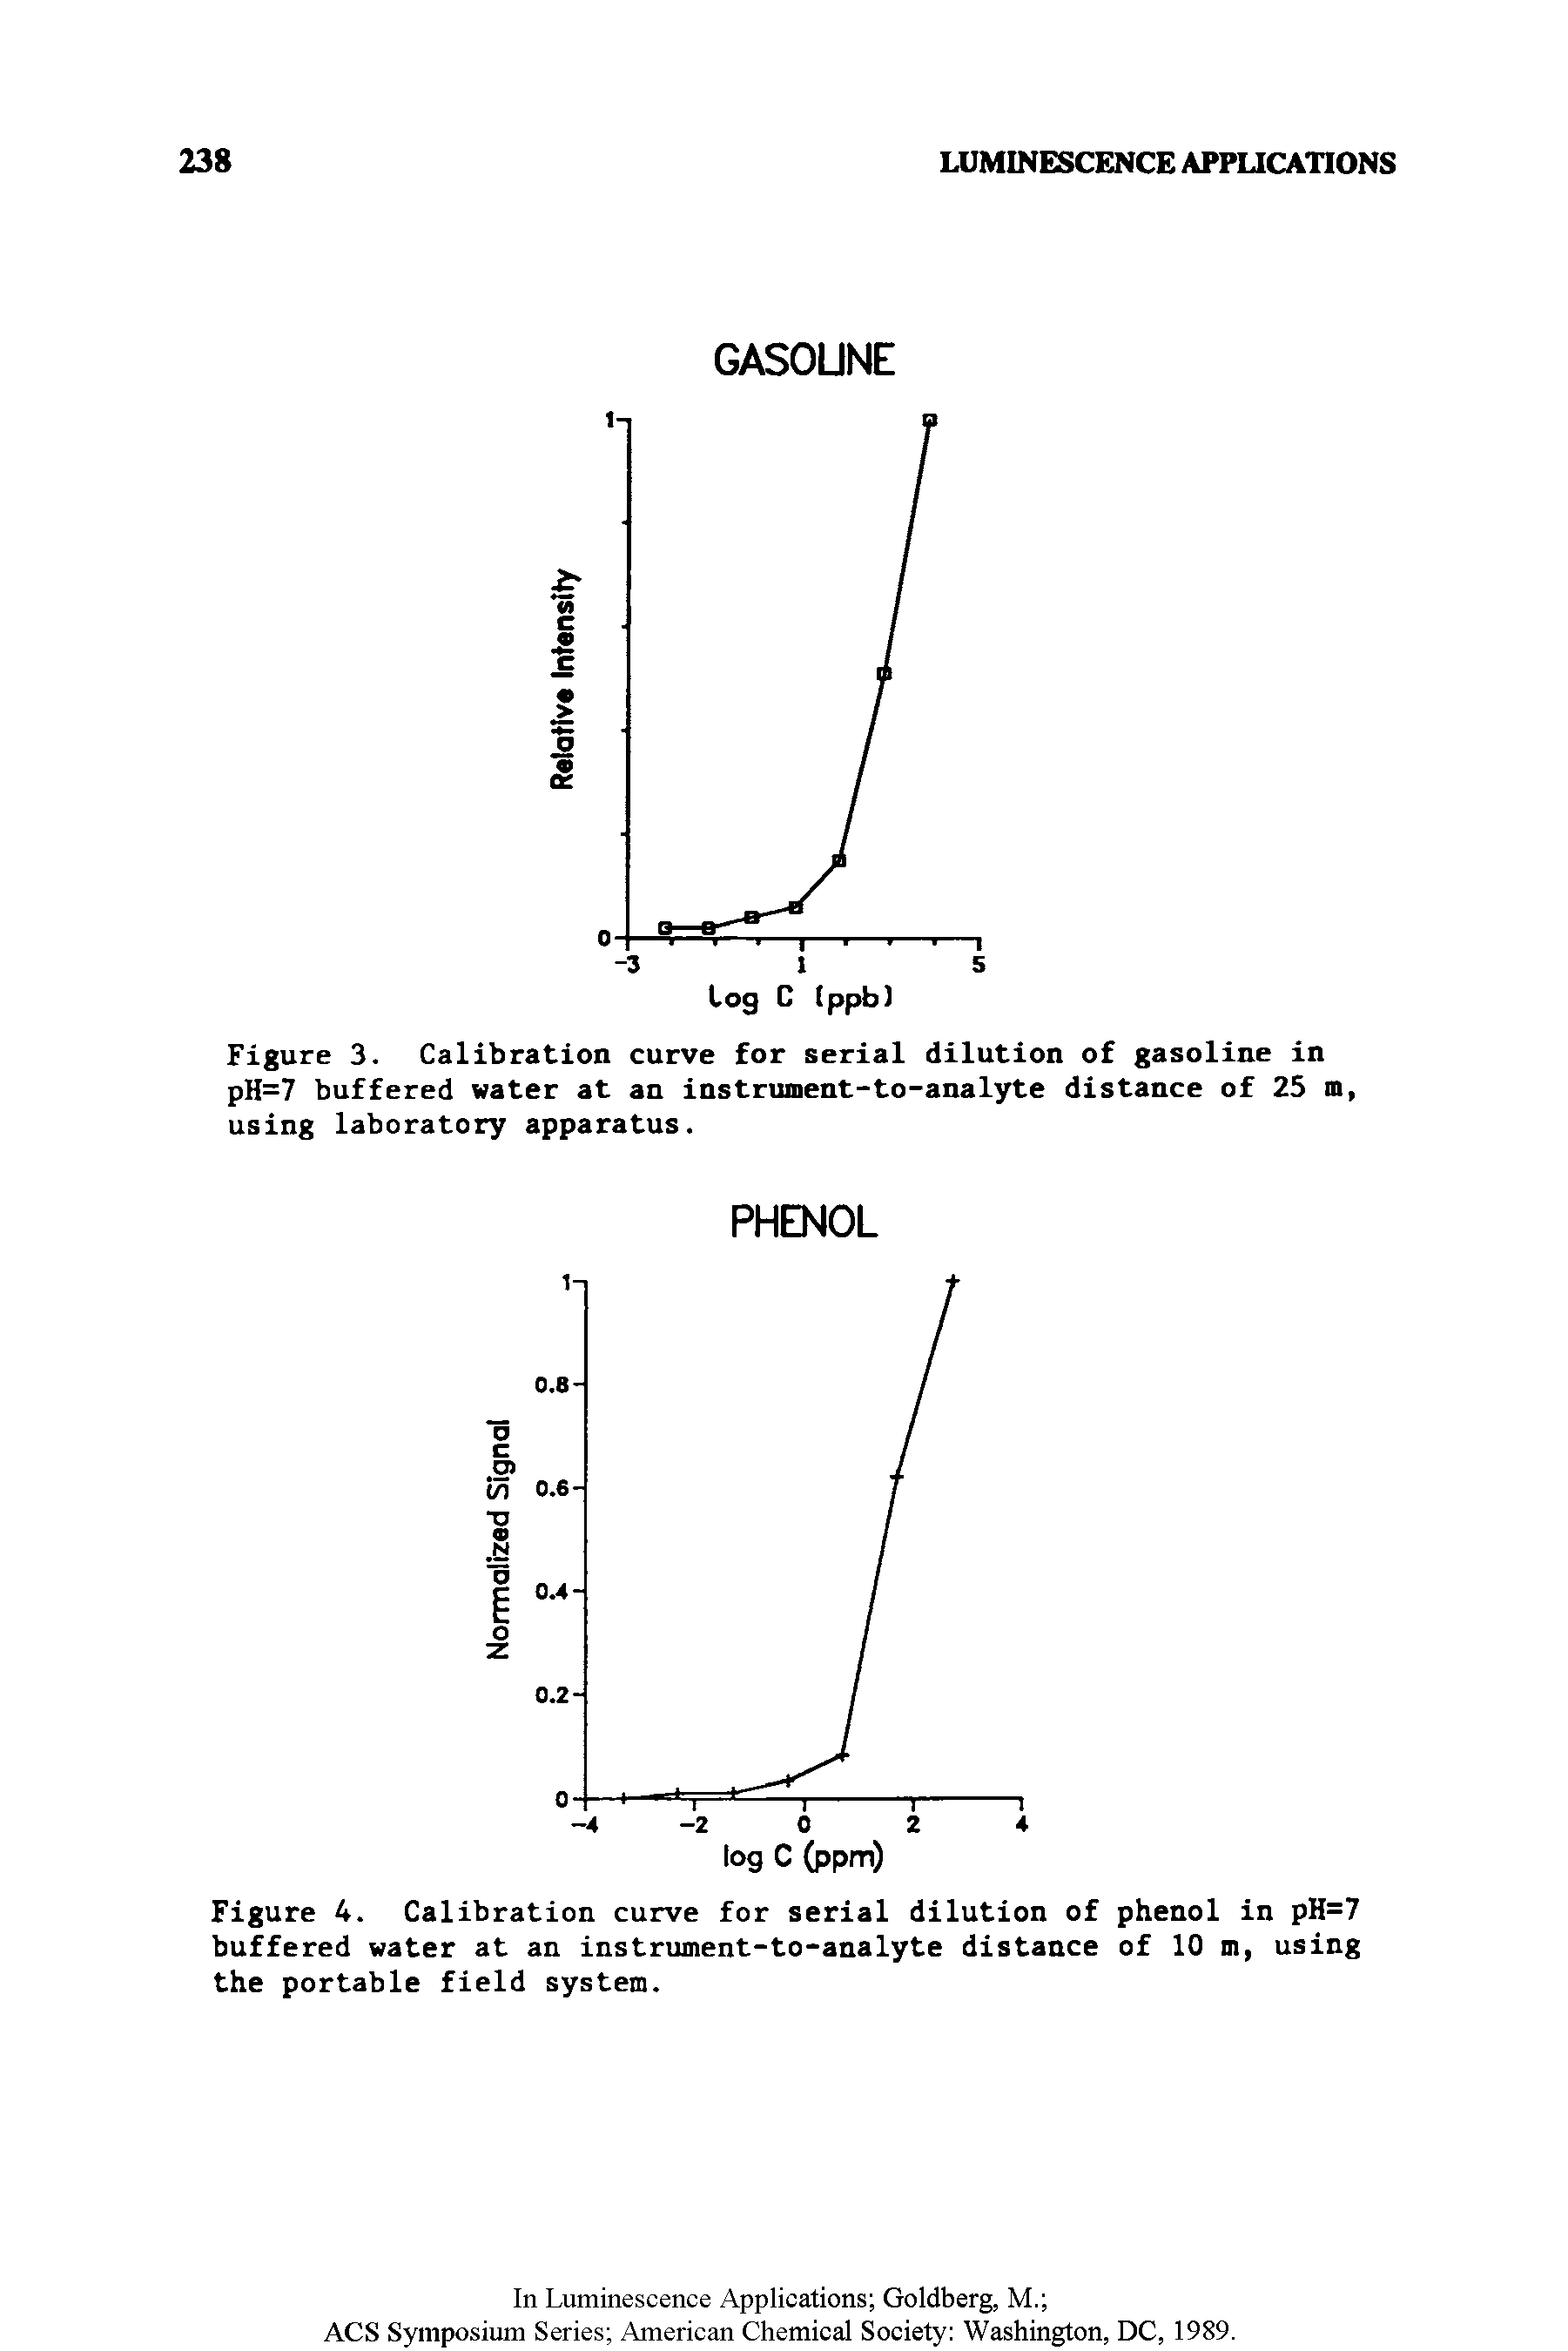 Figure 3. Calibration curve for serial dilution of gasoline in pH=7 buffered water at an instrument-to-analyte distance of 25 m, using laboratory apparatus.